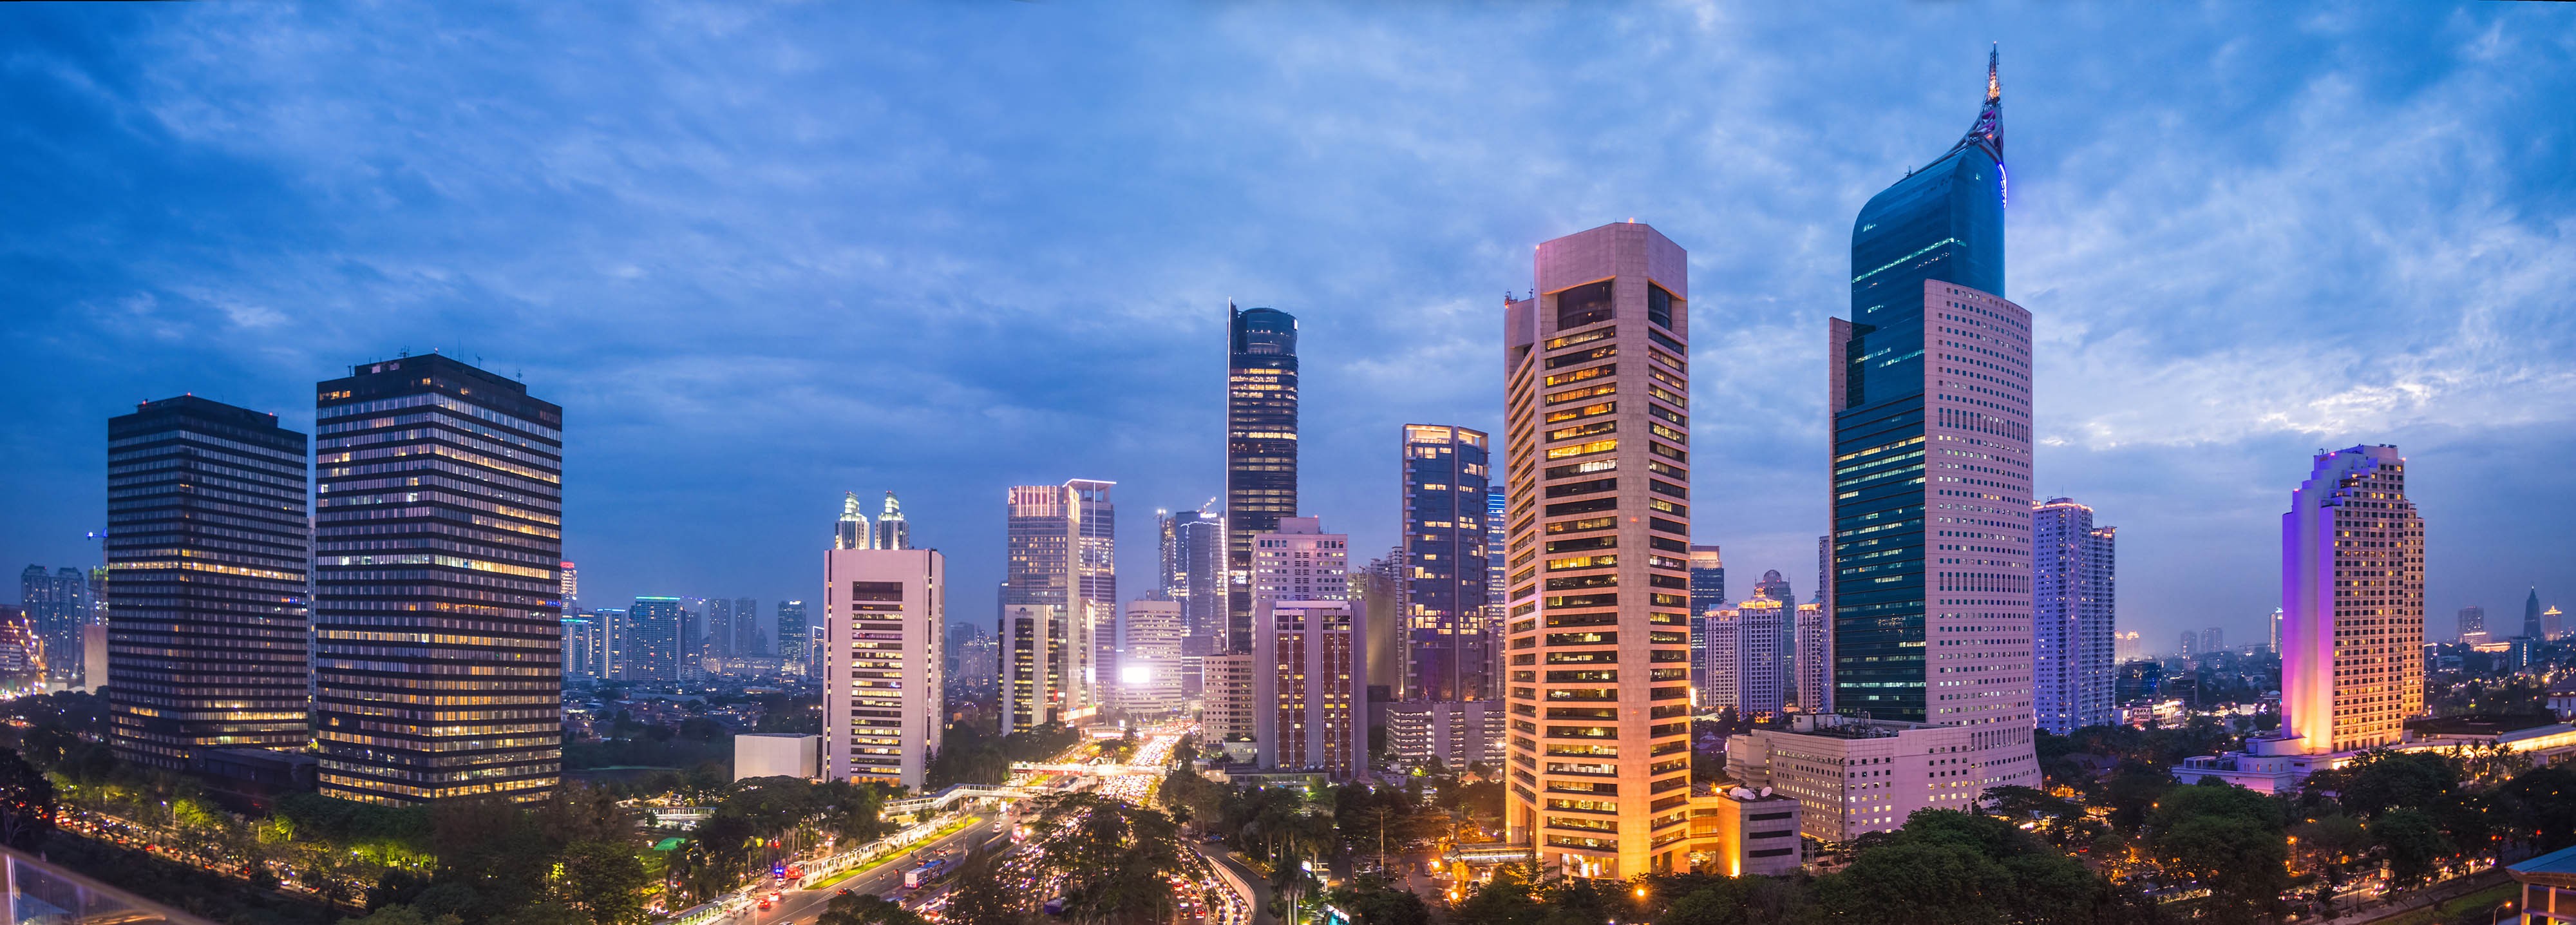 The Central Business District in Jakarta. Indonesia has plenty of labour and natural resources, although logistics issues exist. Photo: Shutterstock